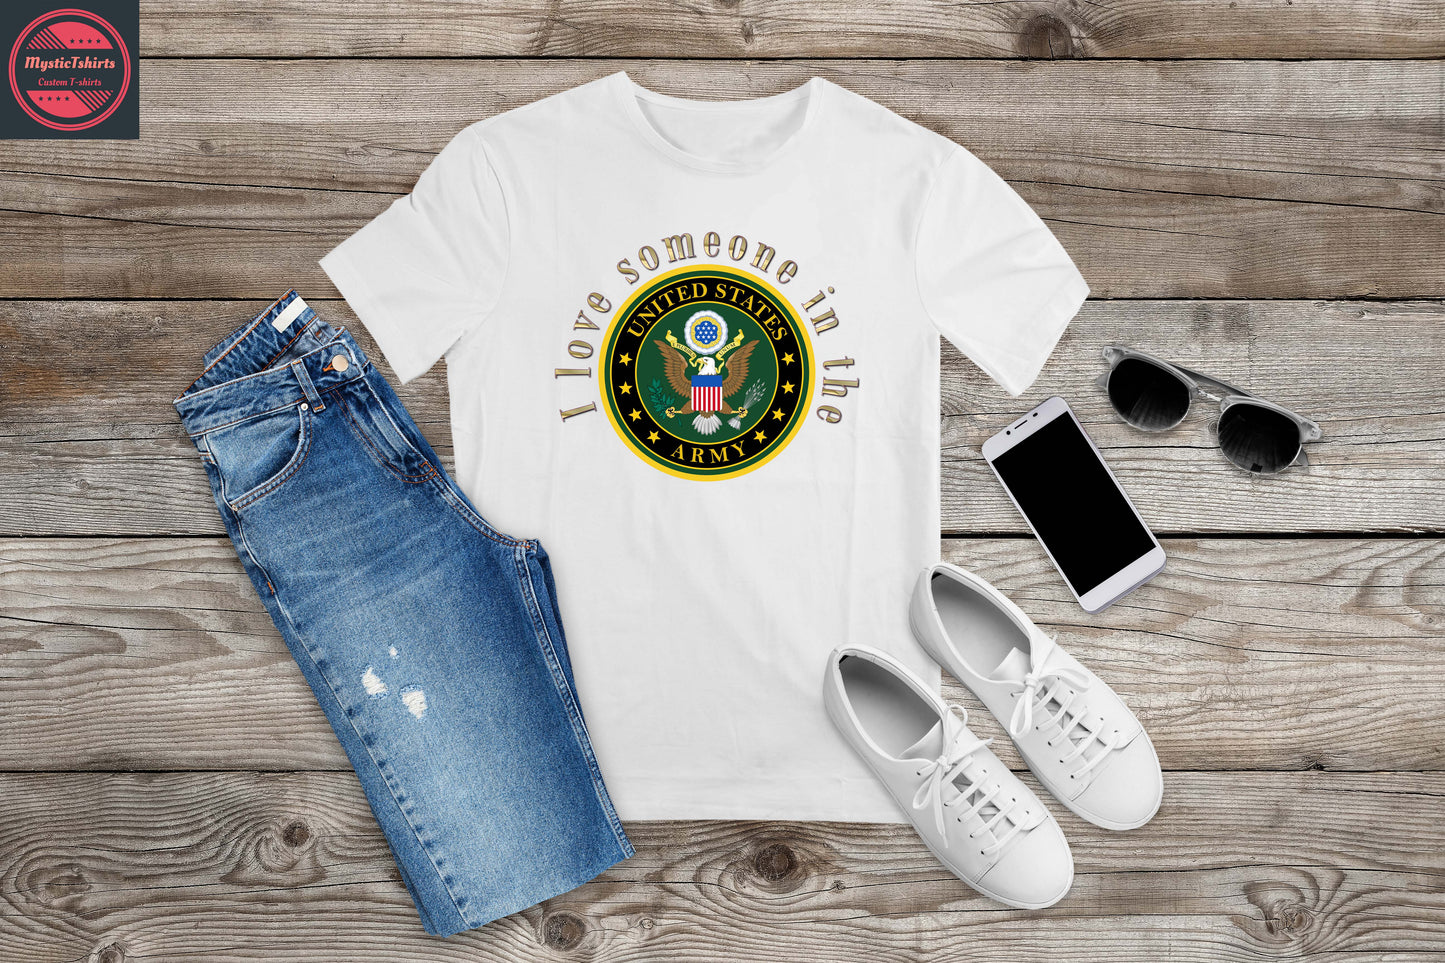 217. I LOVE SOMEONE IS THE US ARMY, Custom Made Shirt, Personalized T-Shirt, Custom Text, Make Your Own Shirt, Custom Tee